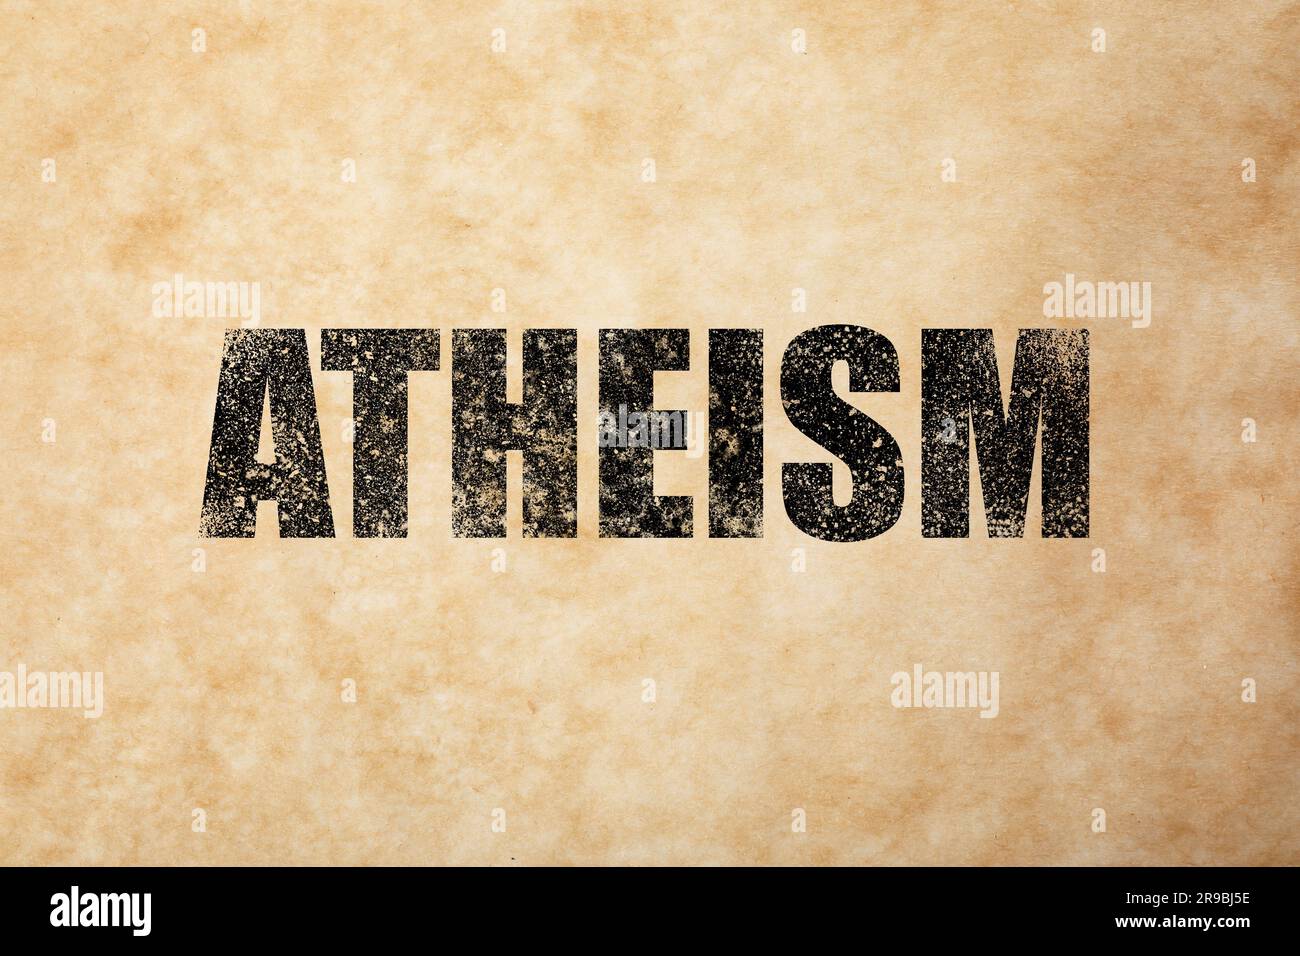 Black word Atheism on beige textured background. Philosophical or religious position Stock Photo